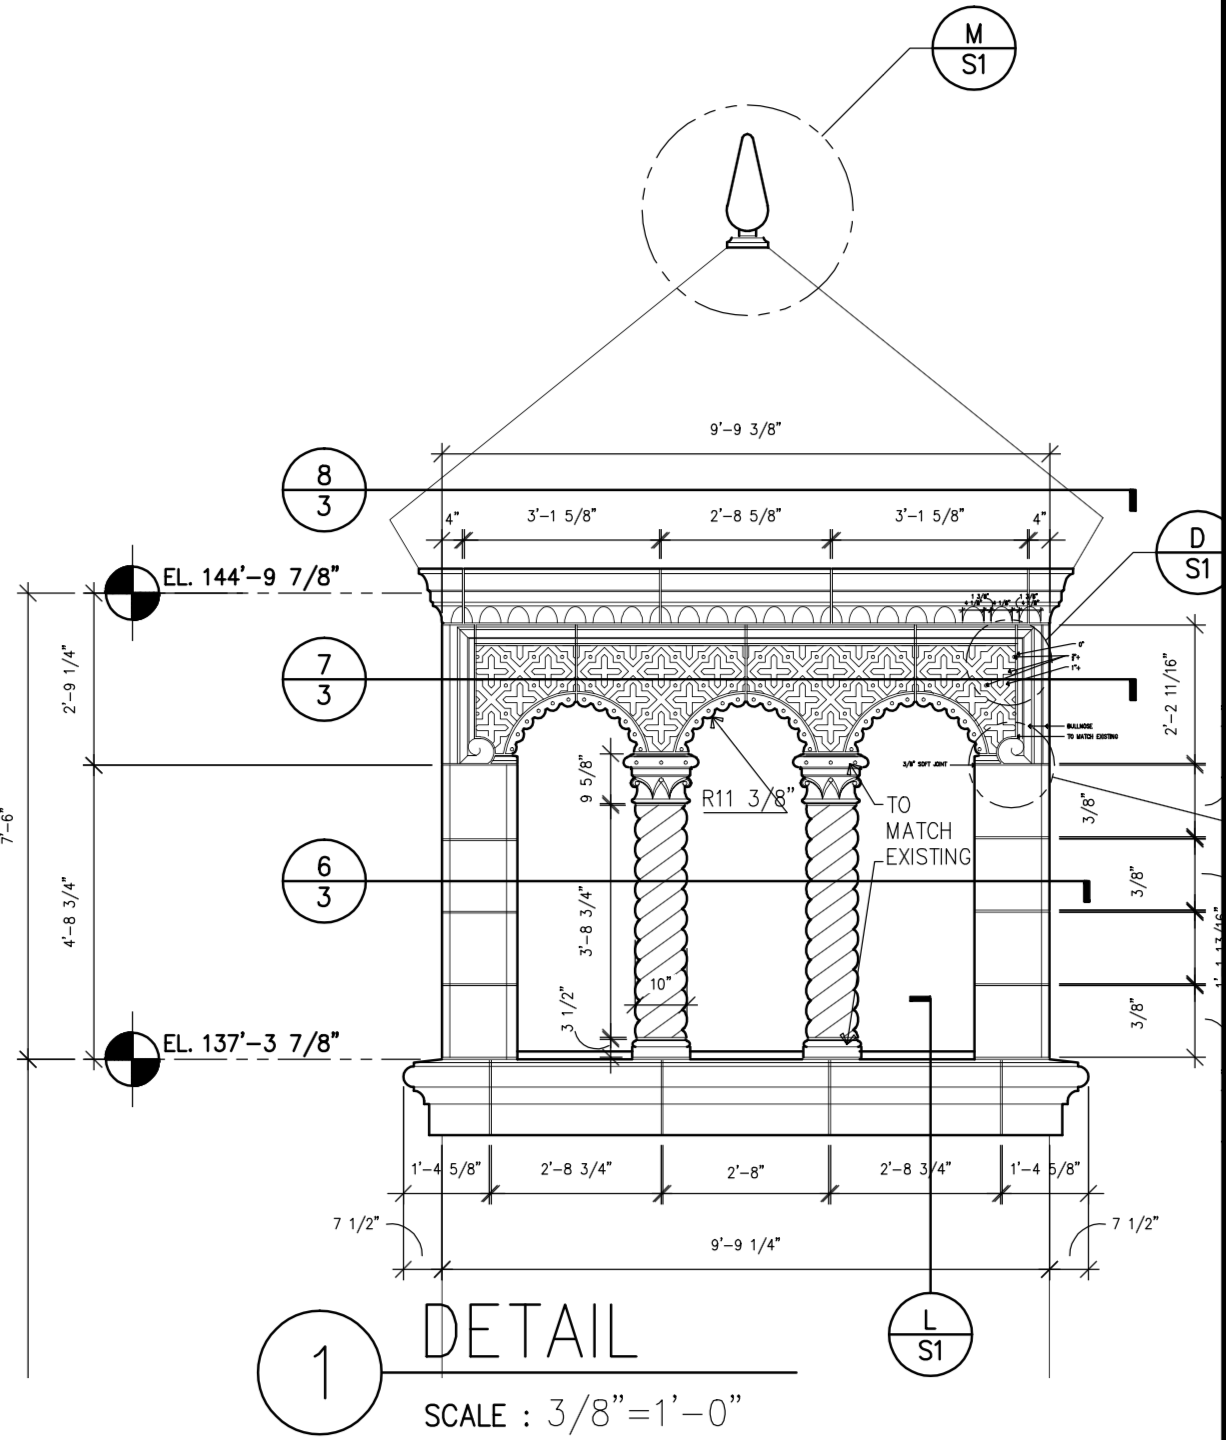 Design Details for the top of the clock tower at highland park village shopping center